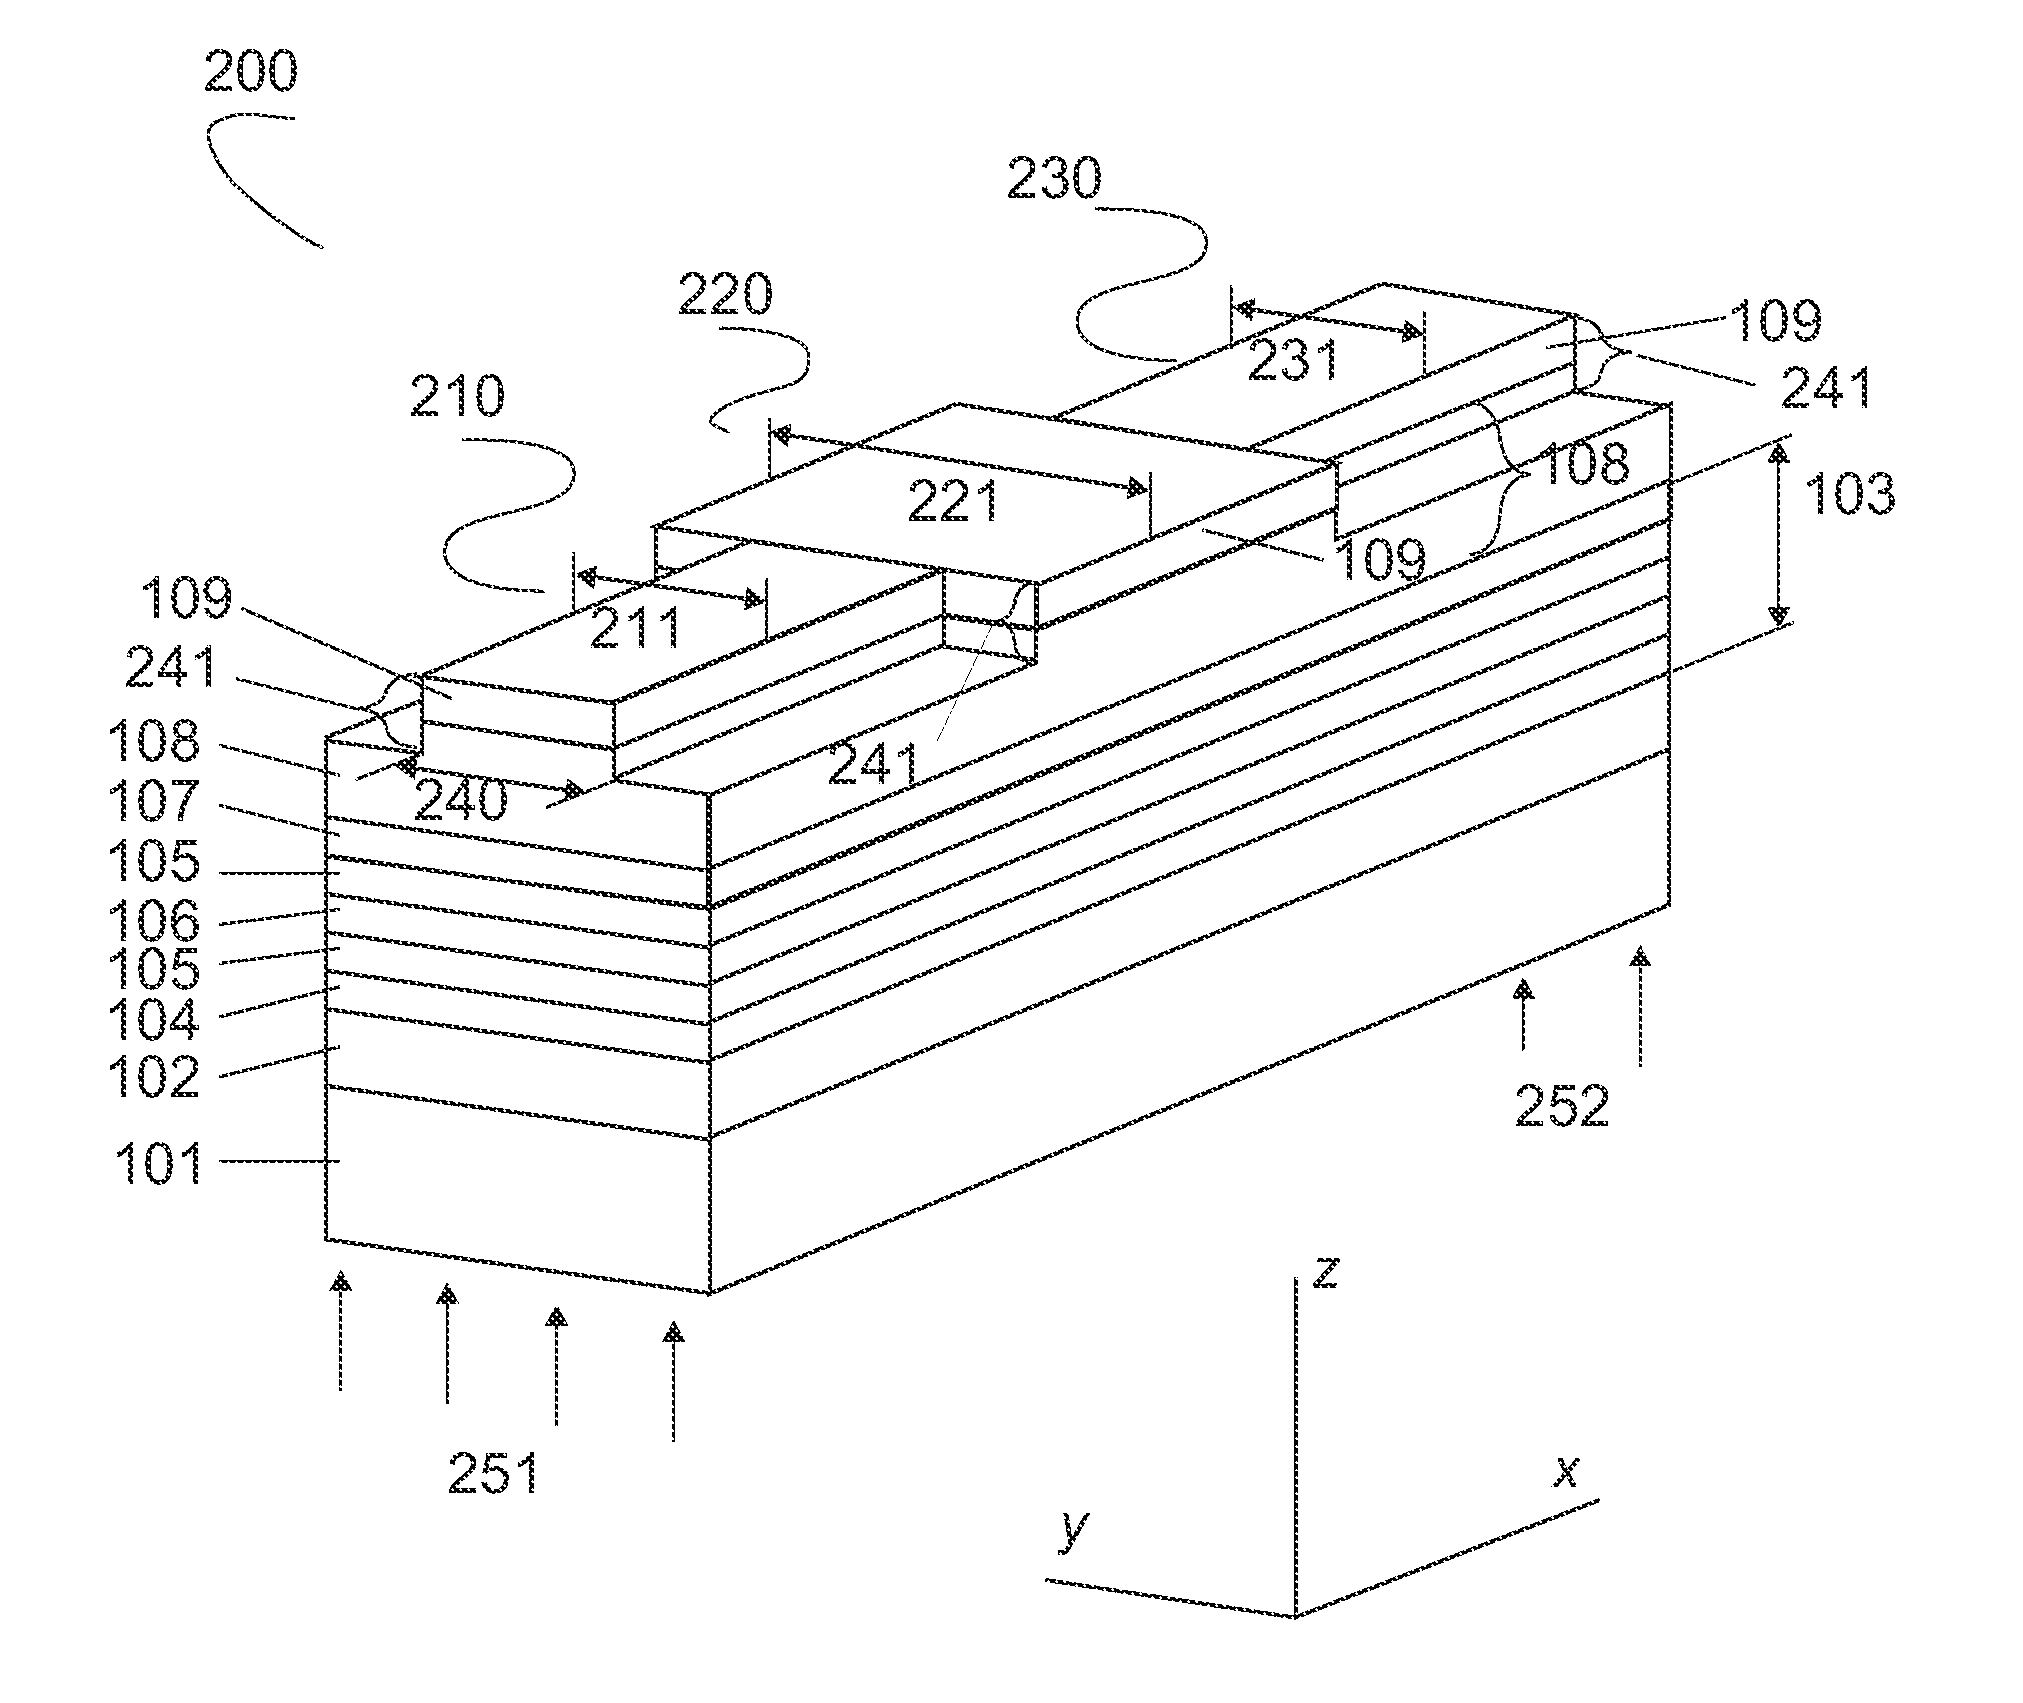 High-Power Optoelectronic Device with Improved Beam Quality Incorporating A Lateral Mode Filtering Section